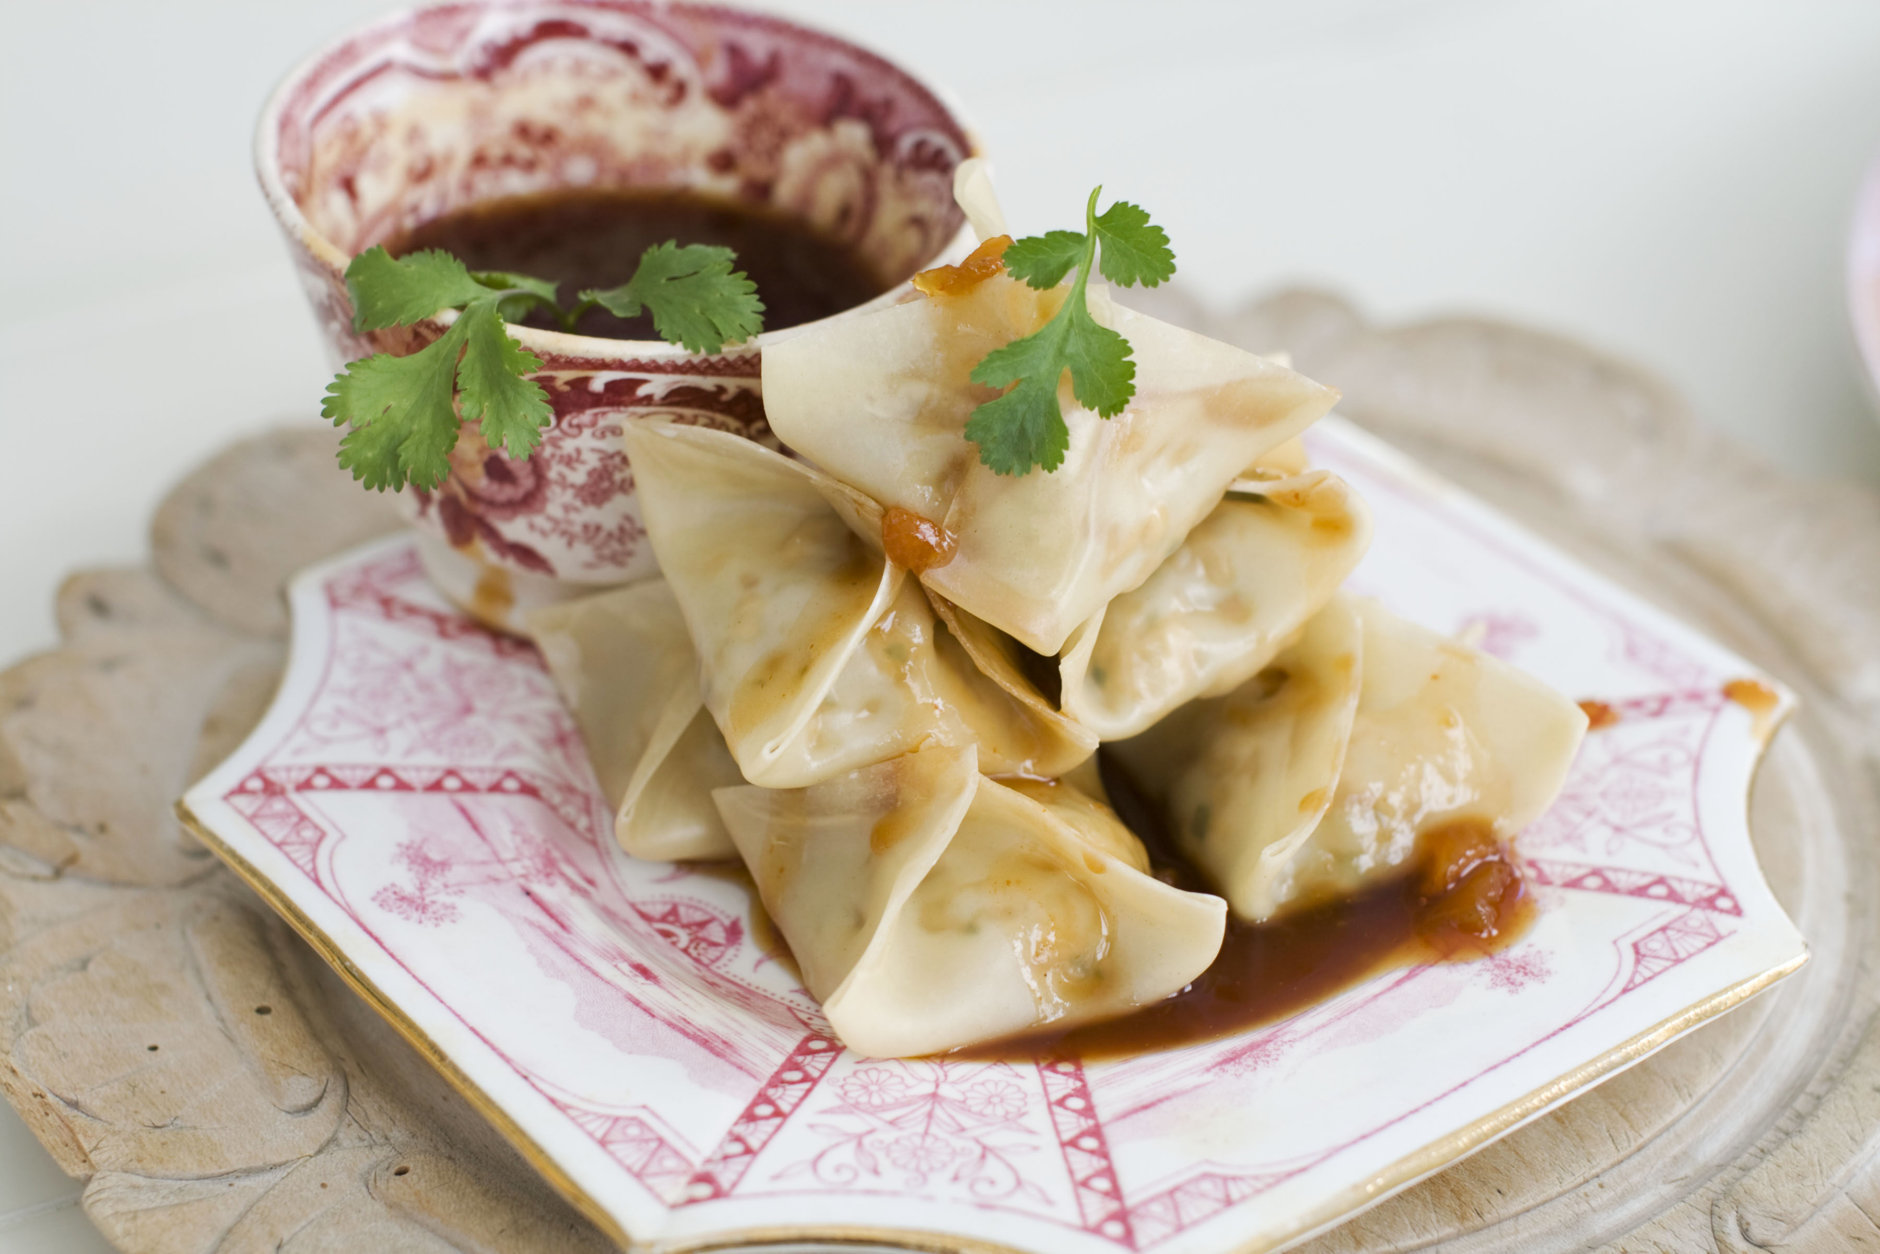 In this image taken on January 14, 2013, vegetarian steamed dumplings with sweet-and-sour sauce are shown served on a plate in Concord, N.H. (AP Photo/Matthew Mead)